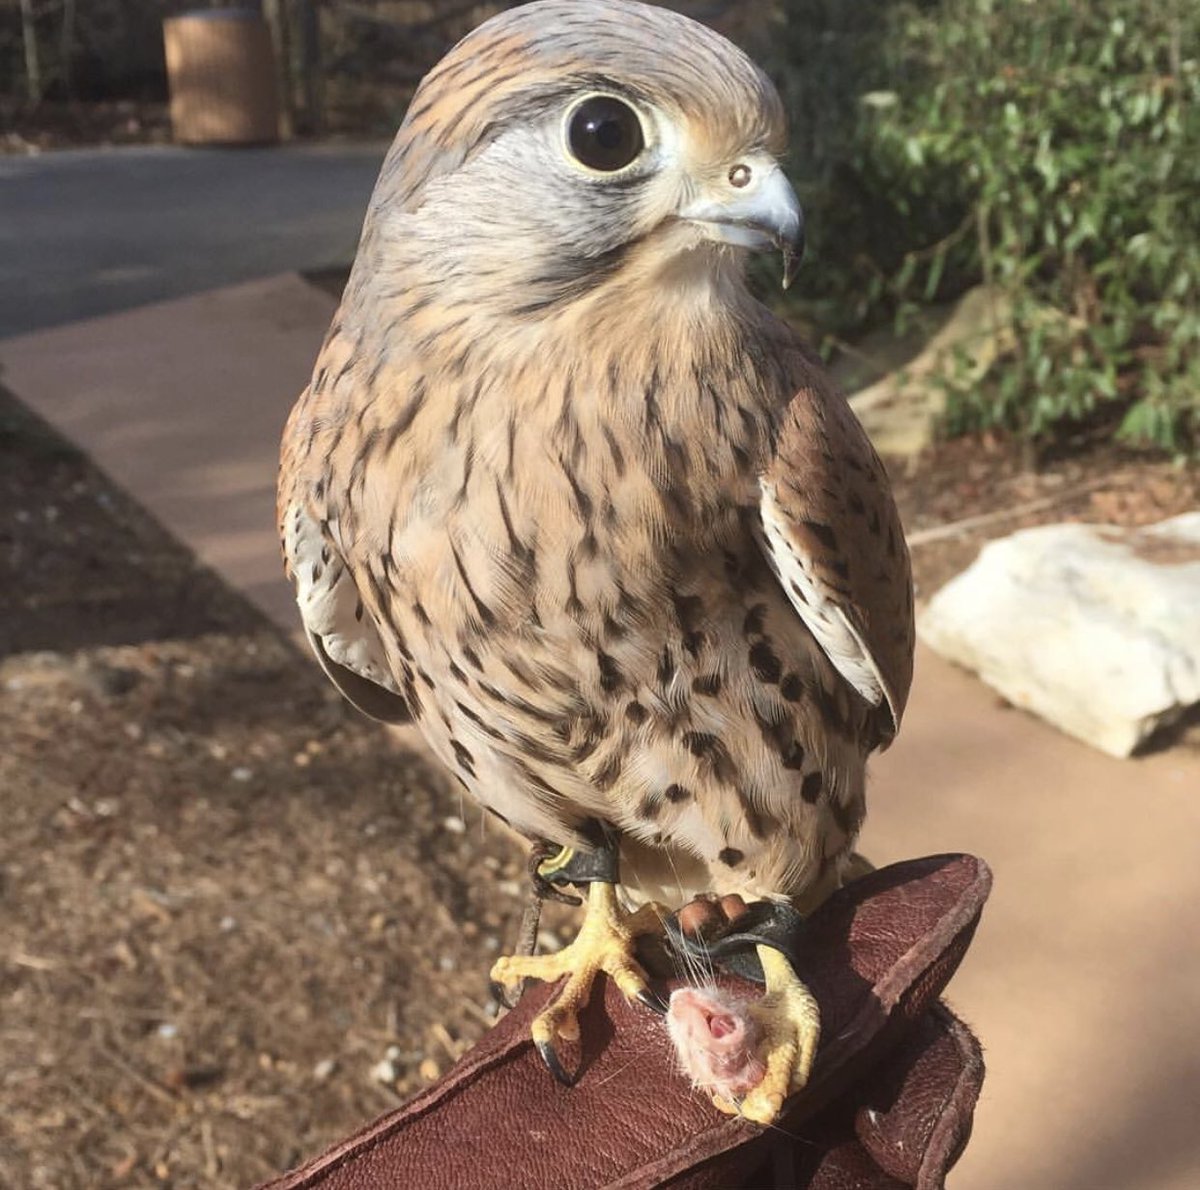 Mouse head was this #EurasianKestrel’s favorite snack. 

But here’s something cool: Ever stick your head out of a moving car and find that it’s hard to breathe? 

Well, that little dot (baffle) inside their nostrils allows them to breathe normally during high-speed dives. #Falcon